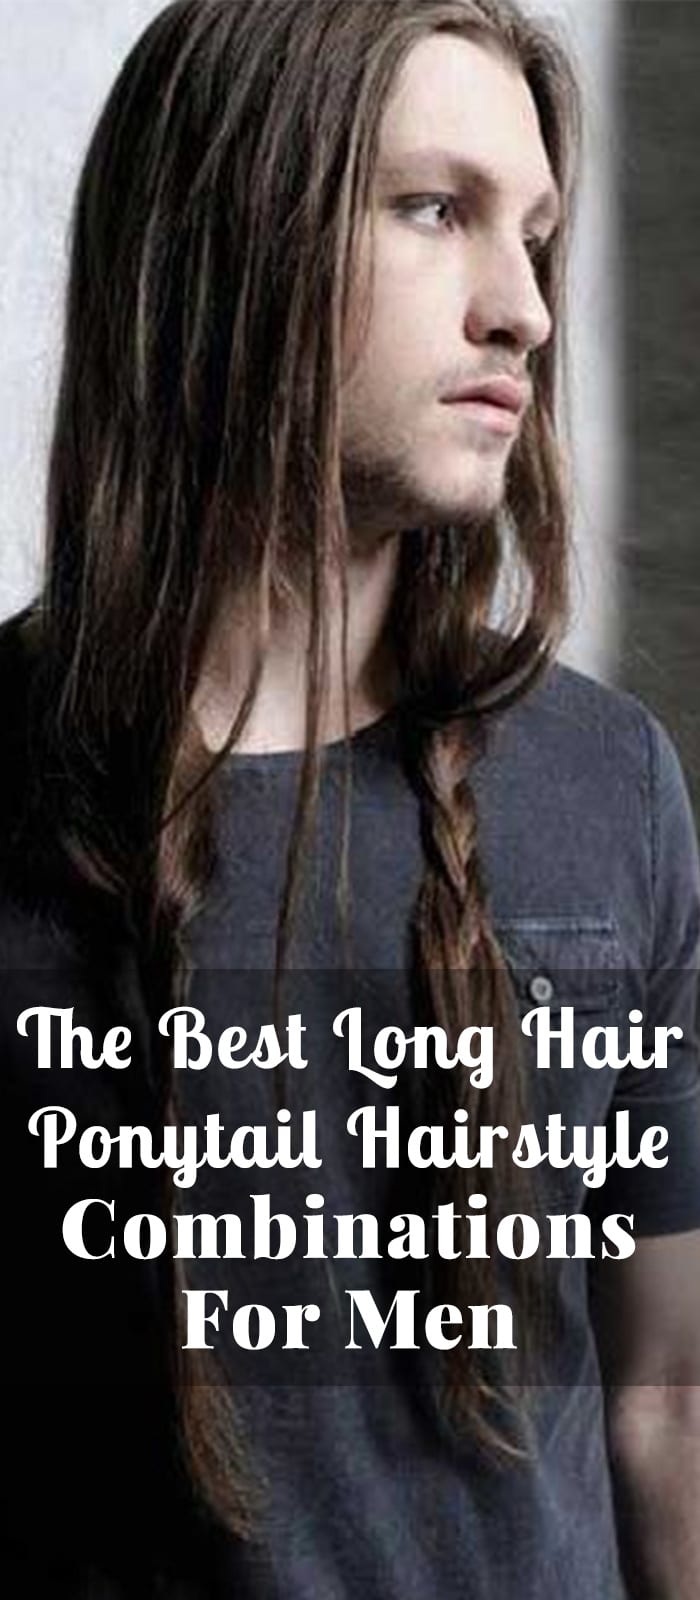 The Best Long Hair Ponytail Hairstyle Combinations For Men